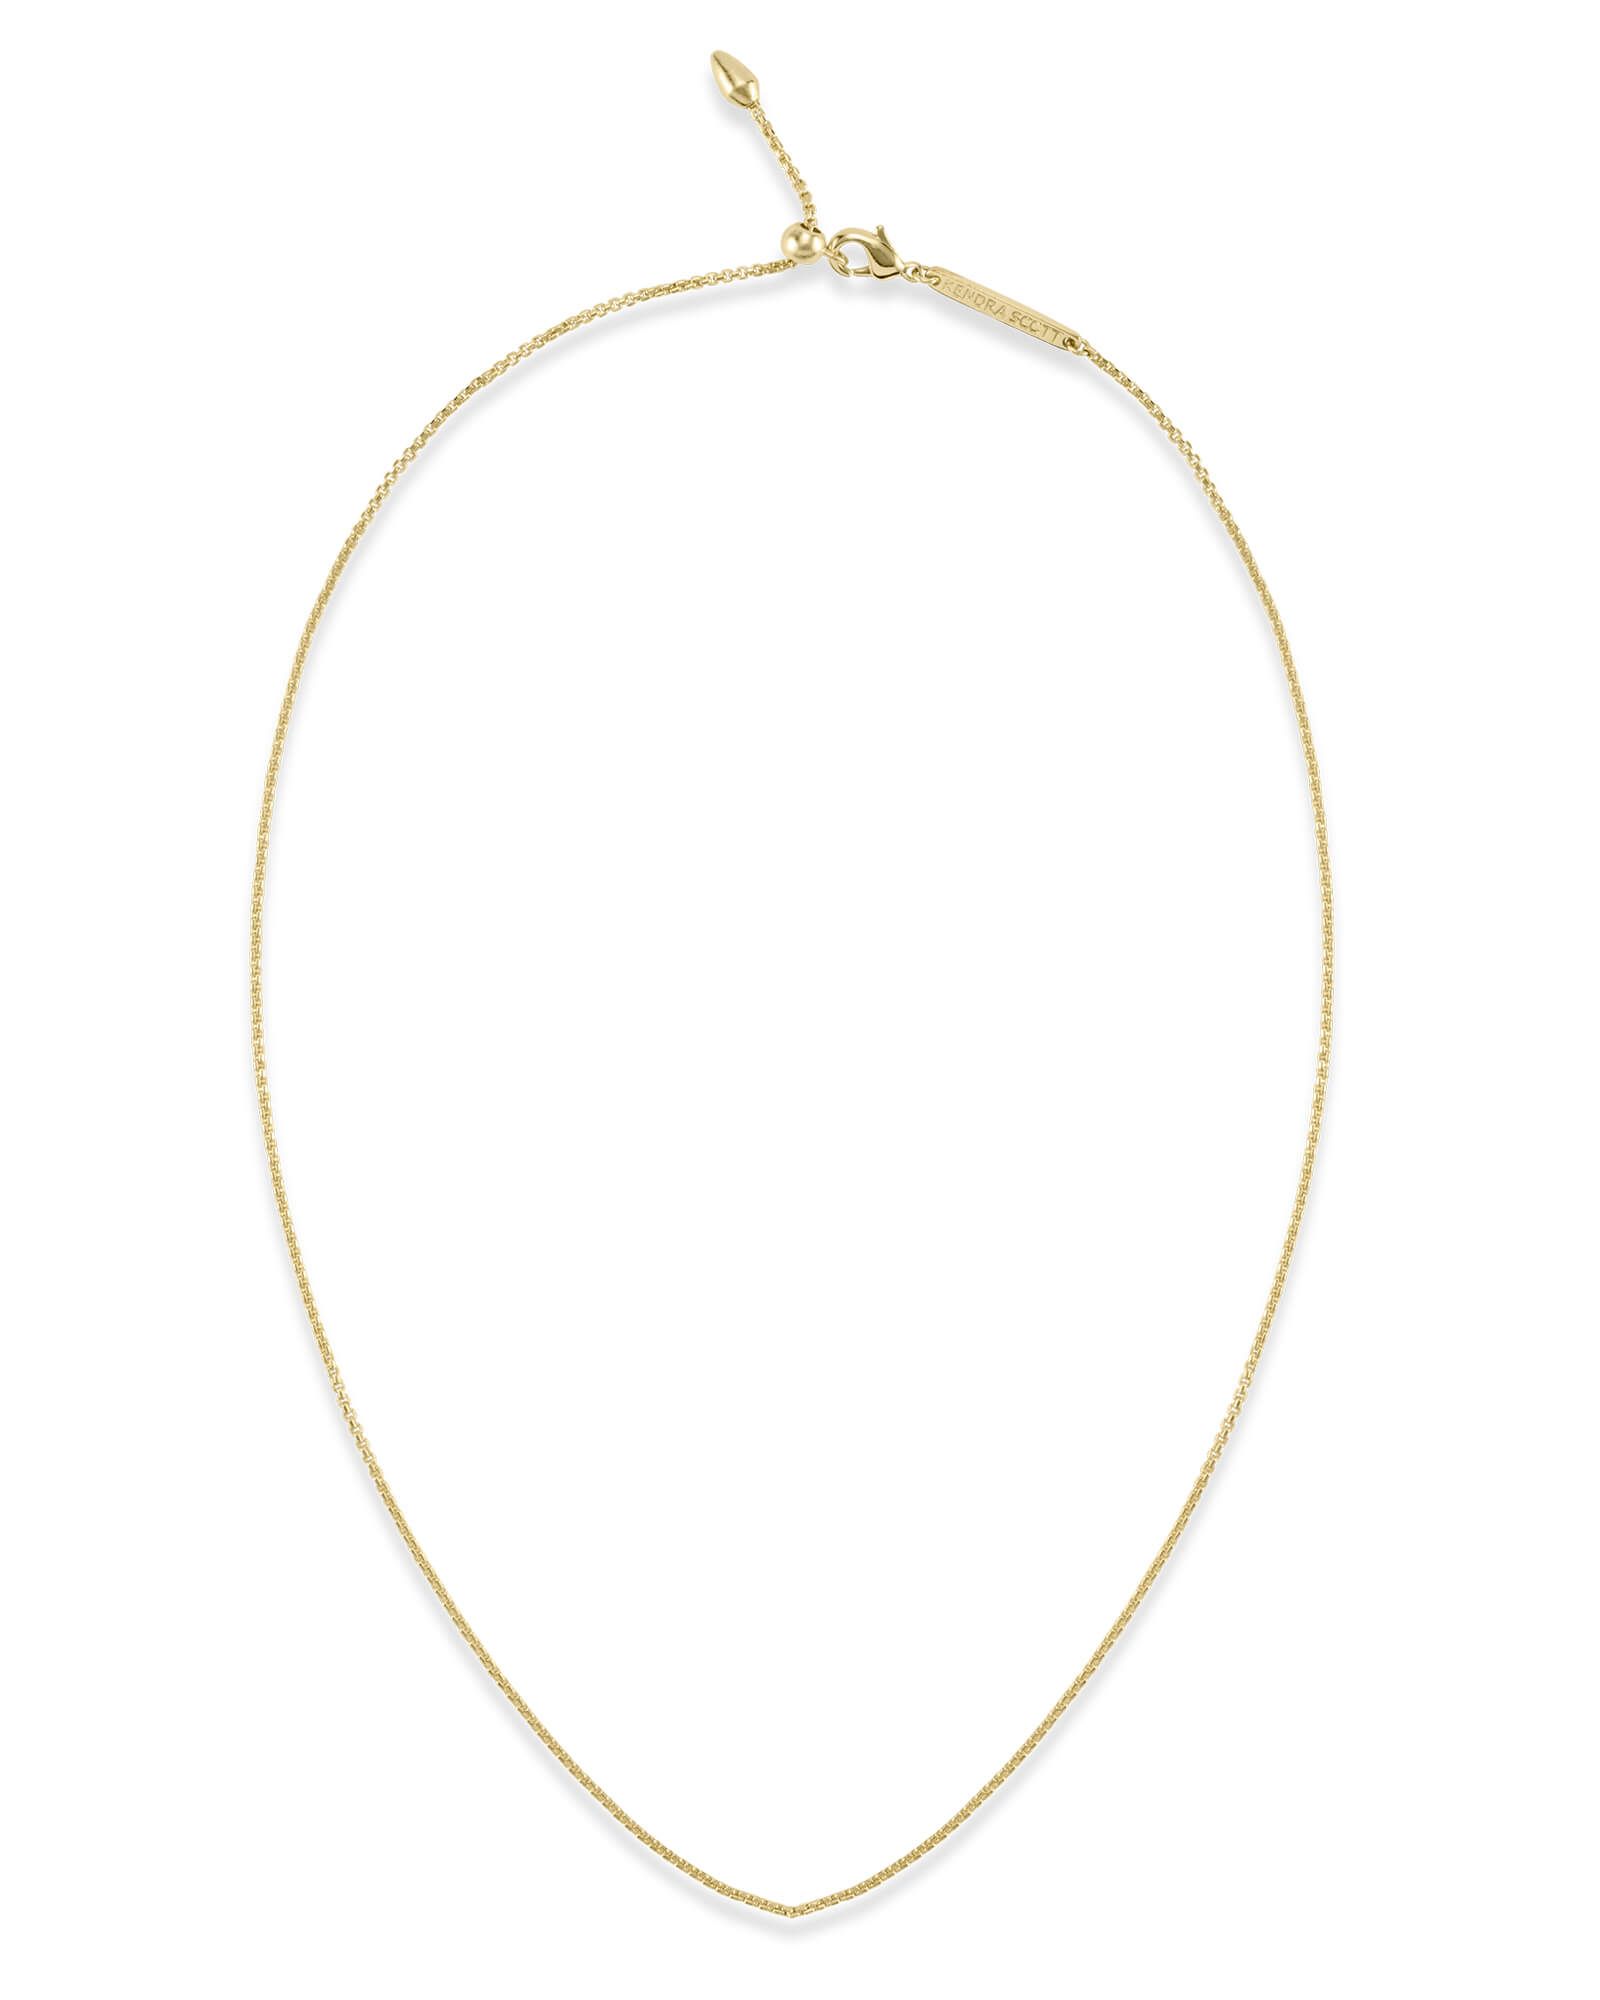 Petite Thin Adjustable Chain Necklace in Gold | Kendra Scott